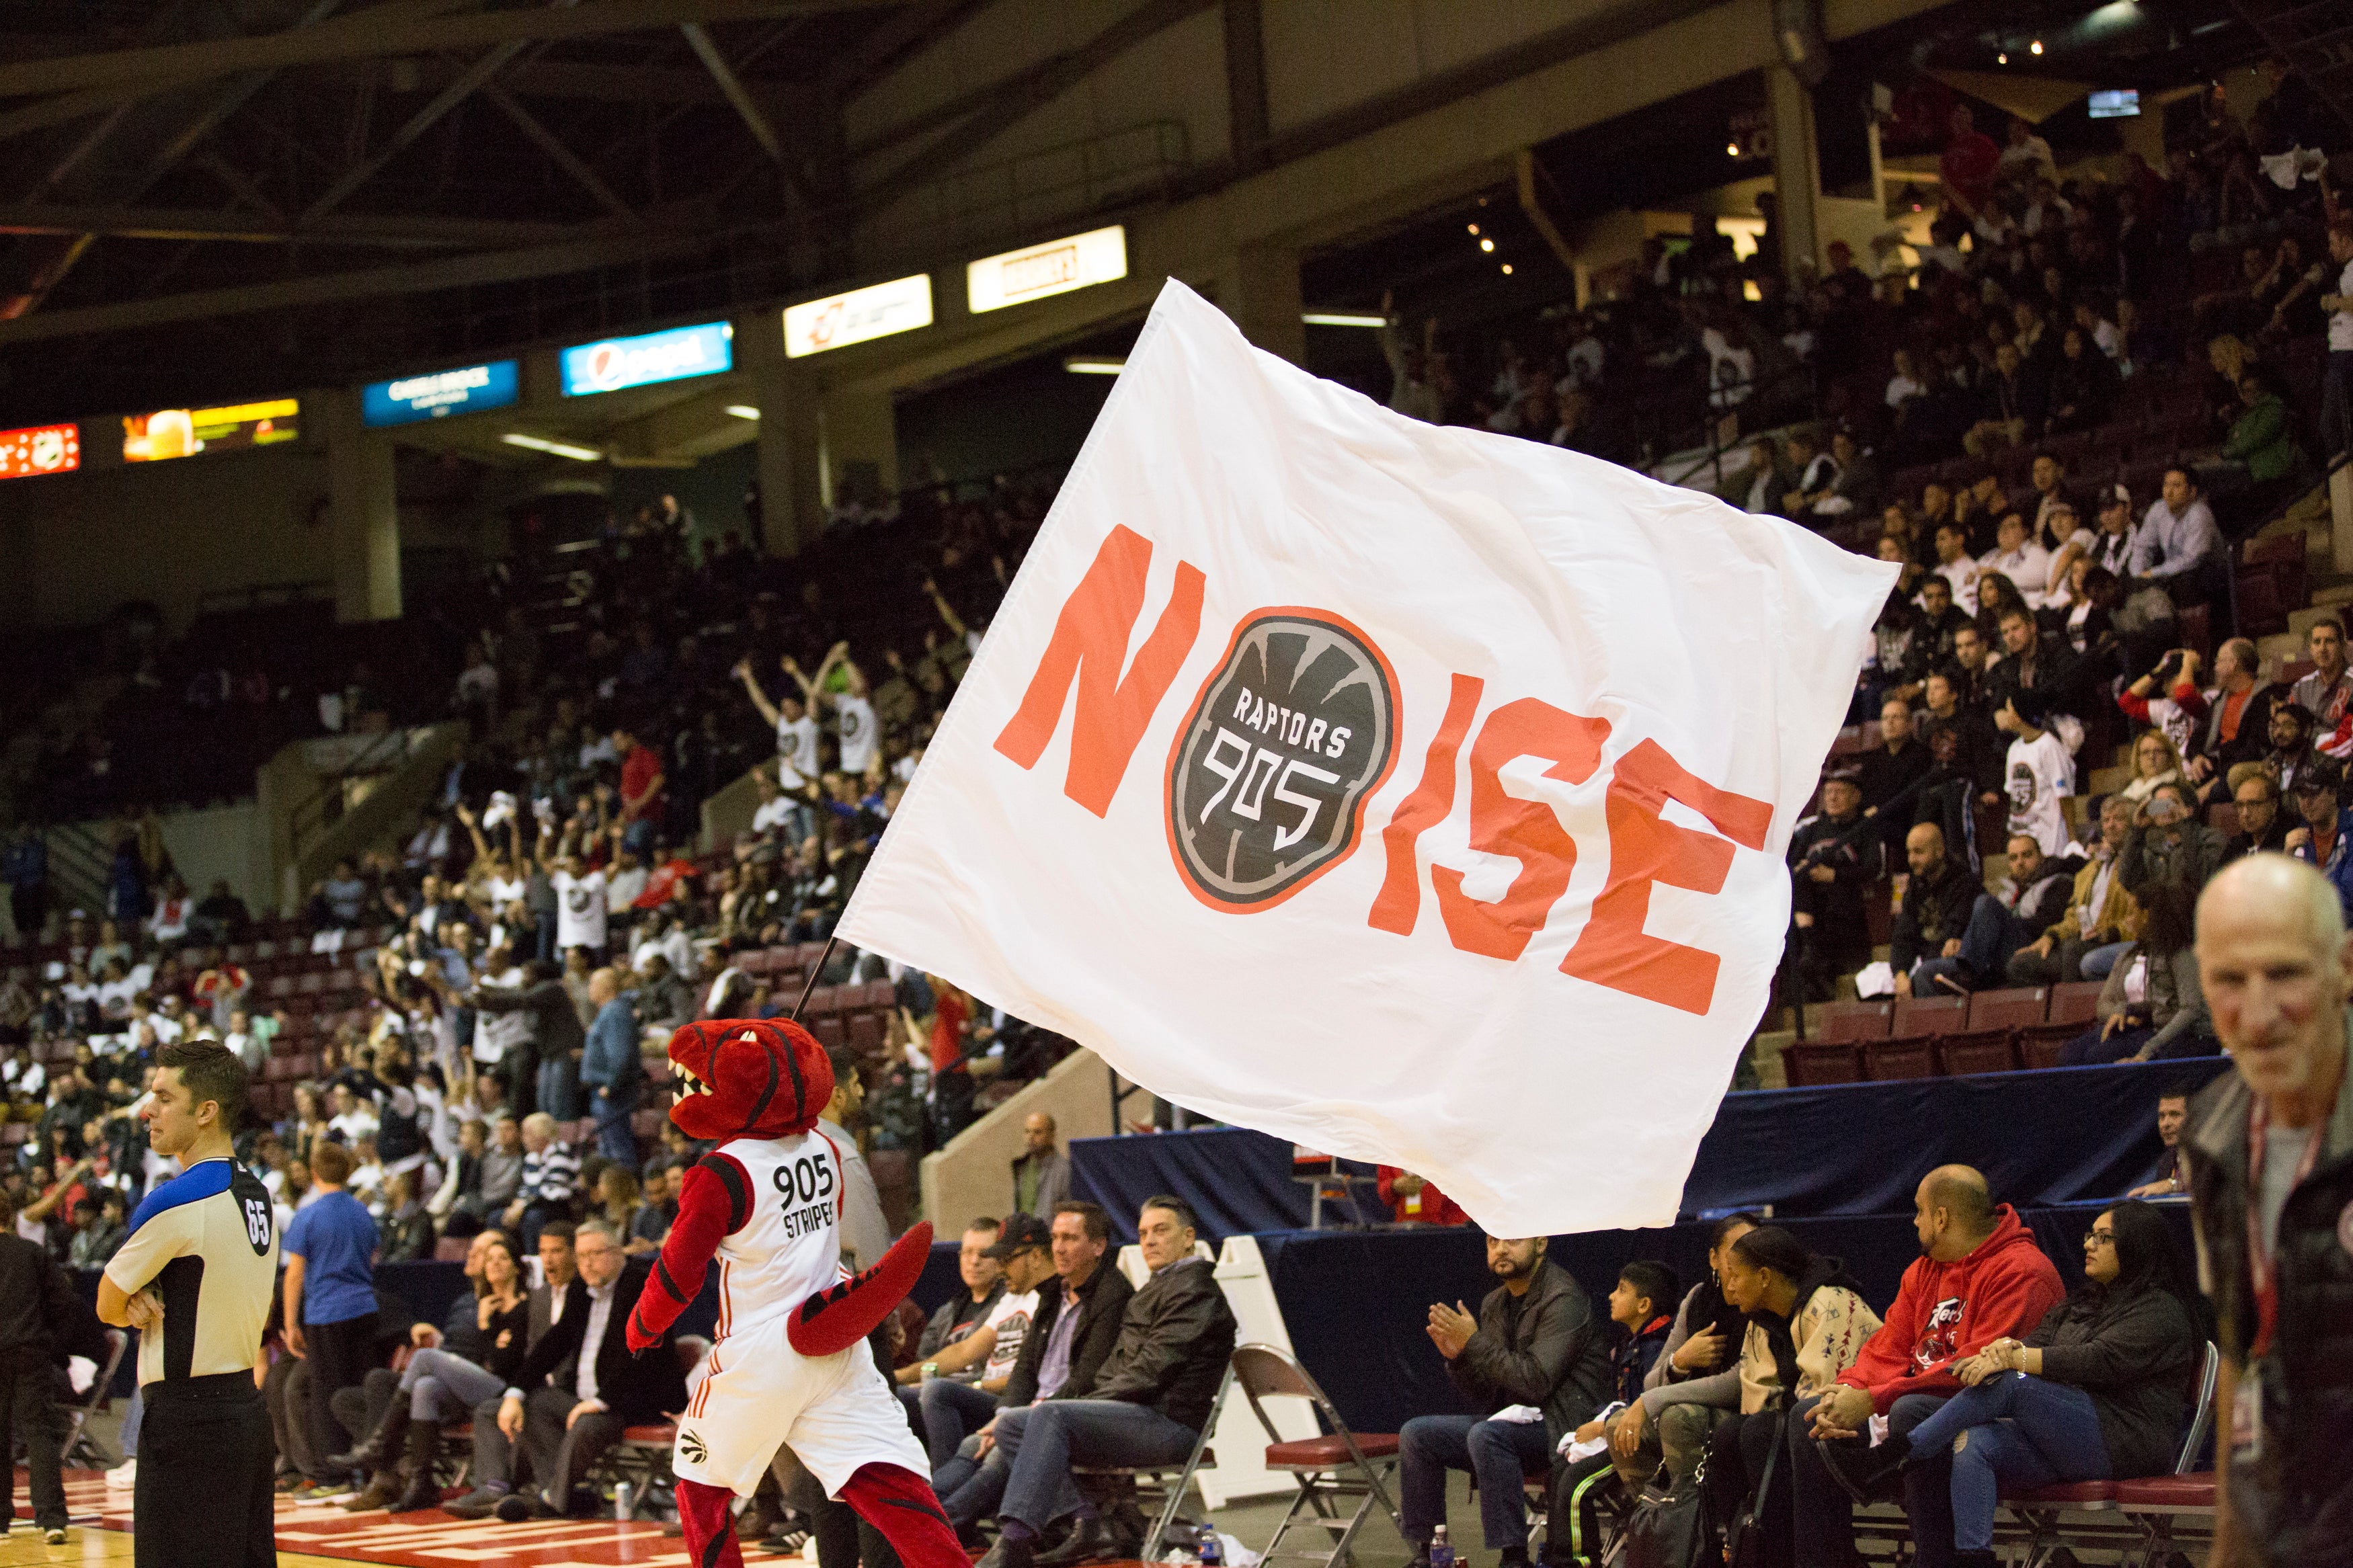 Raptors 905 vs Indiana Mad Ants in Mississauga promo photo for Exclusive presale offer code